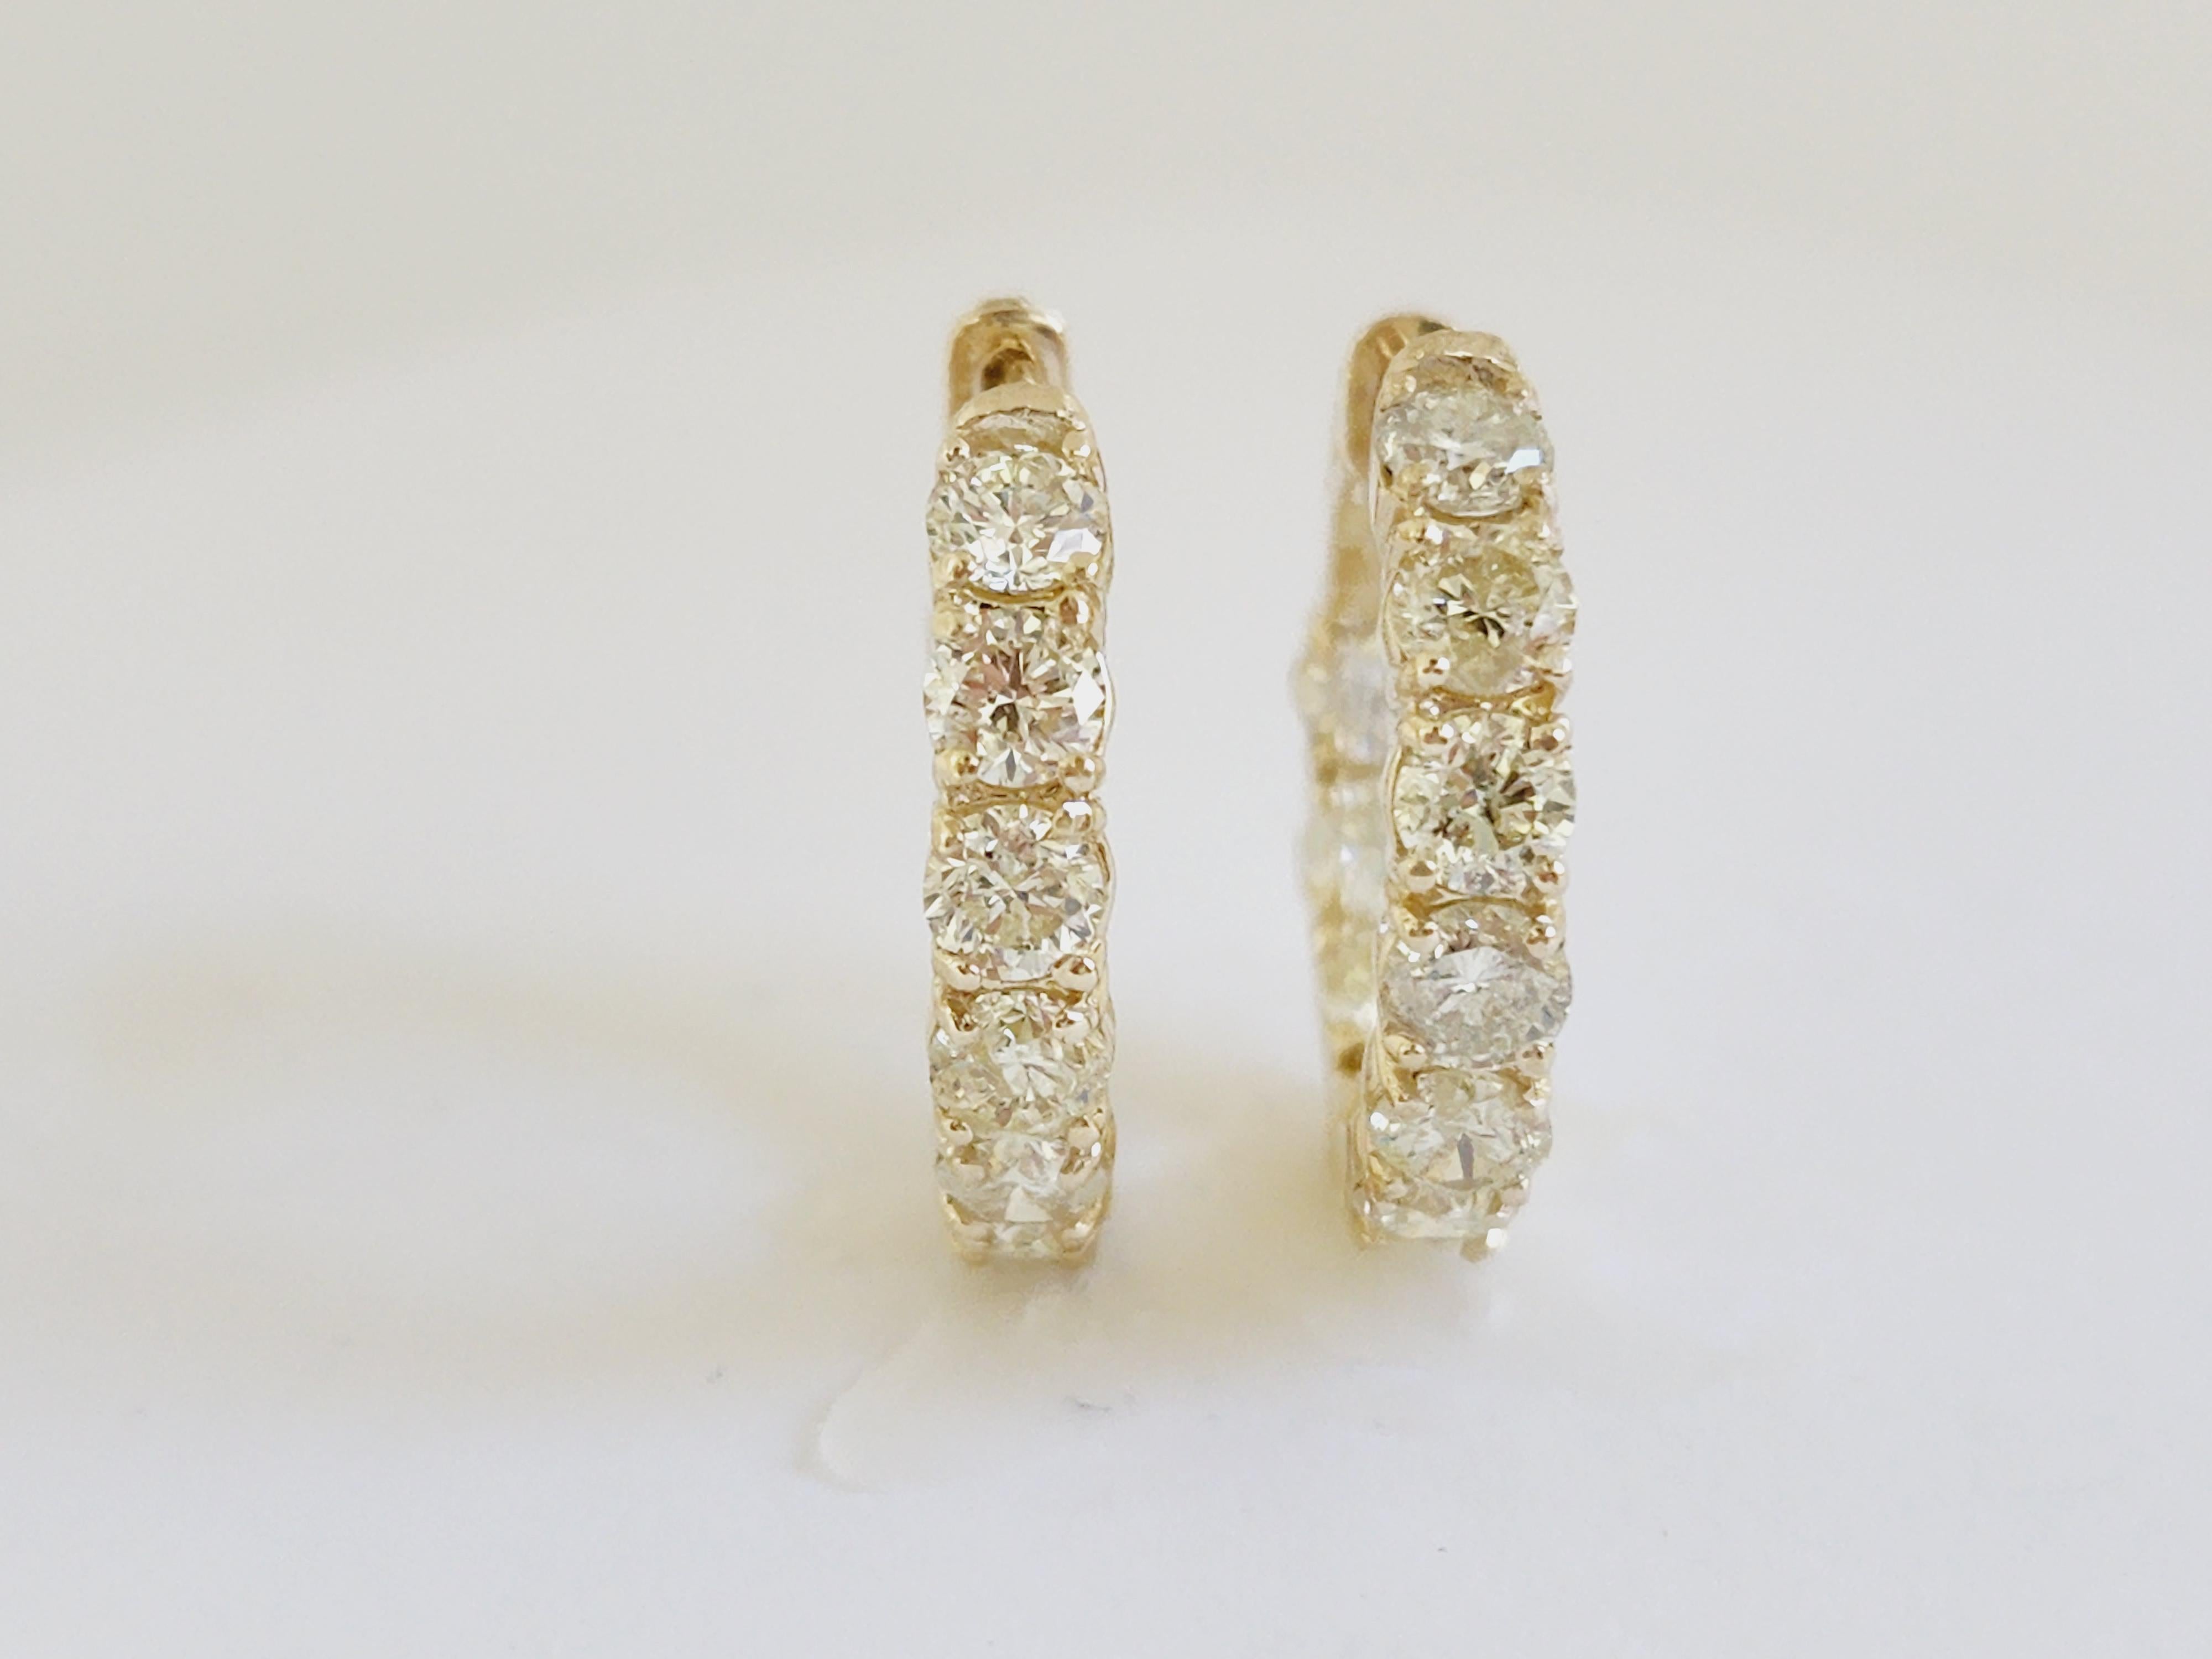 Beautiful pair of diamond Huggie hoop earrings in 14k yellow gold. Secures with snap closure for wear. Elegance for every moment. Inside out style
Average Color I-J, Clarity VS-SI, 
Measures 0.75 inch diameter. 